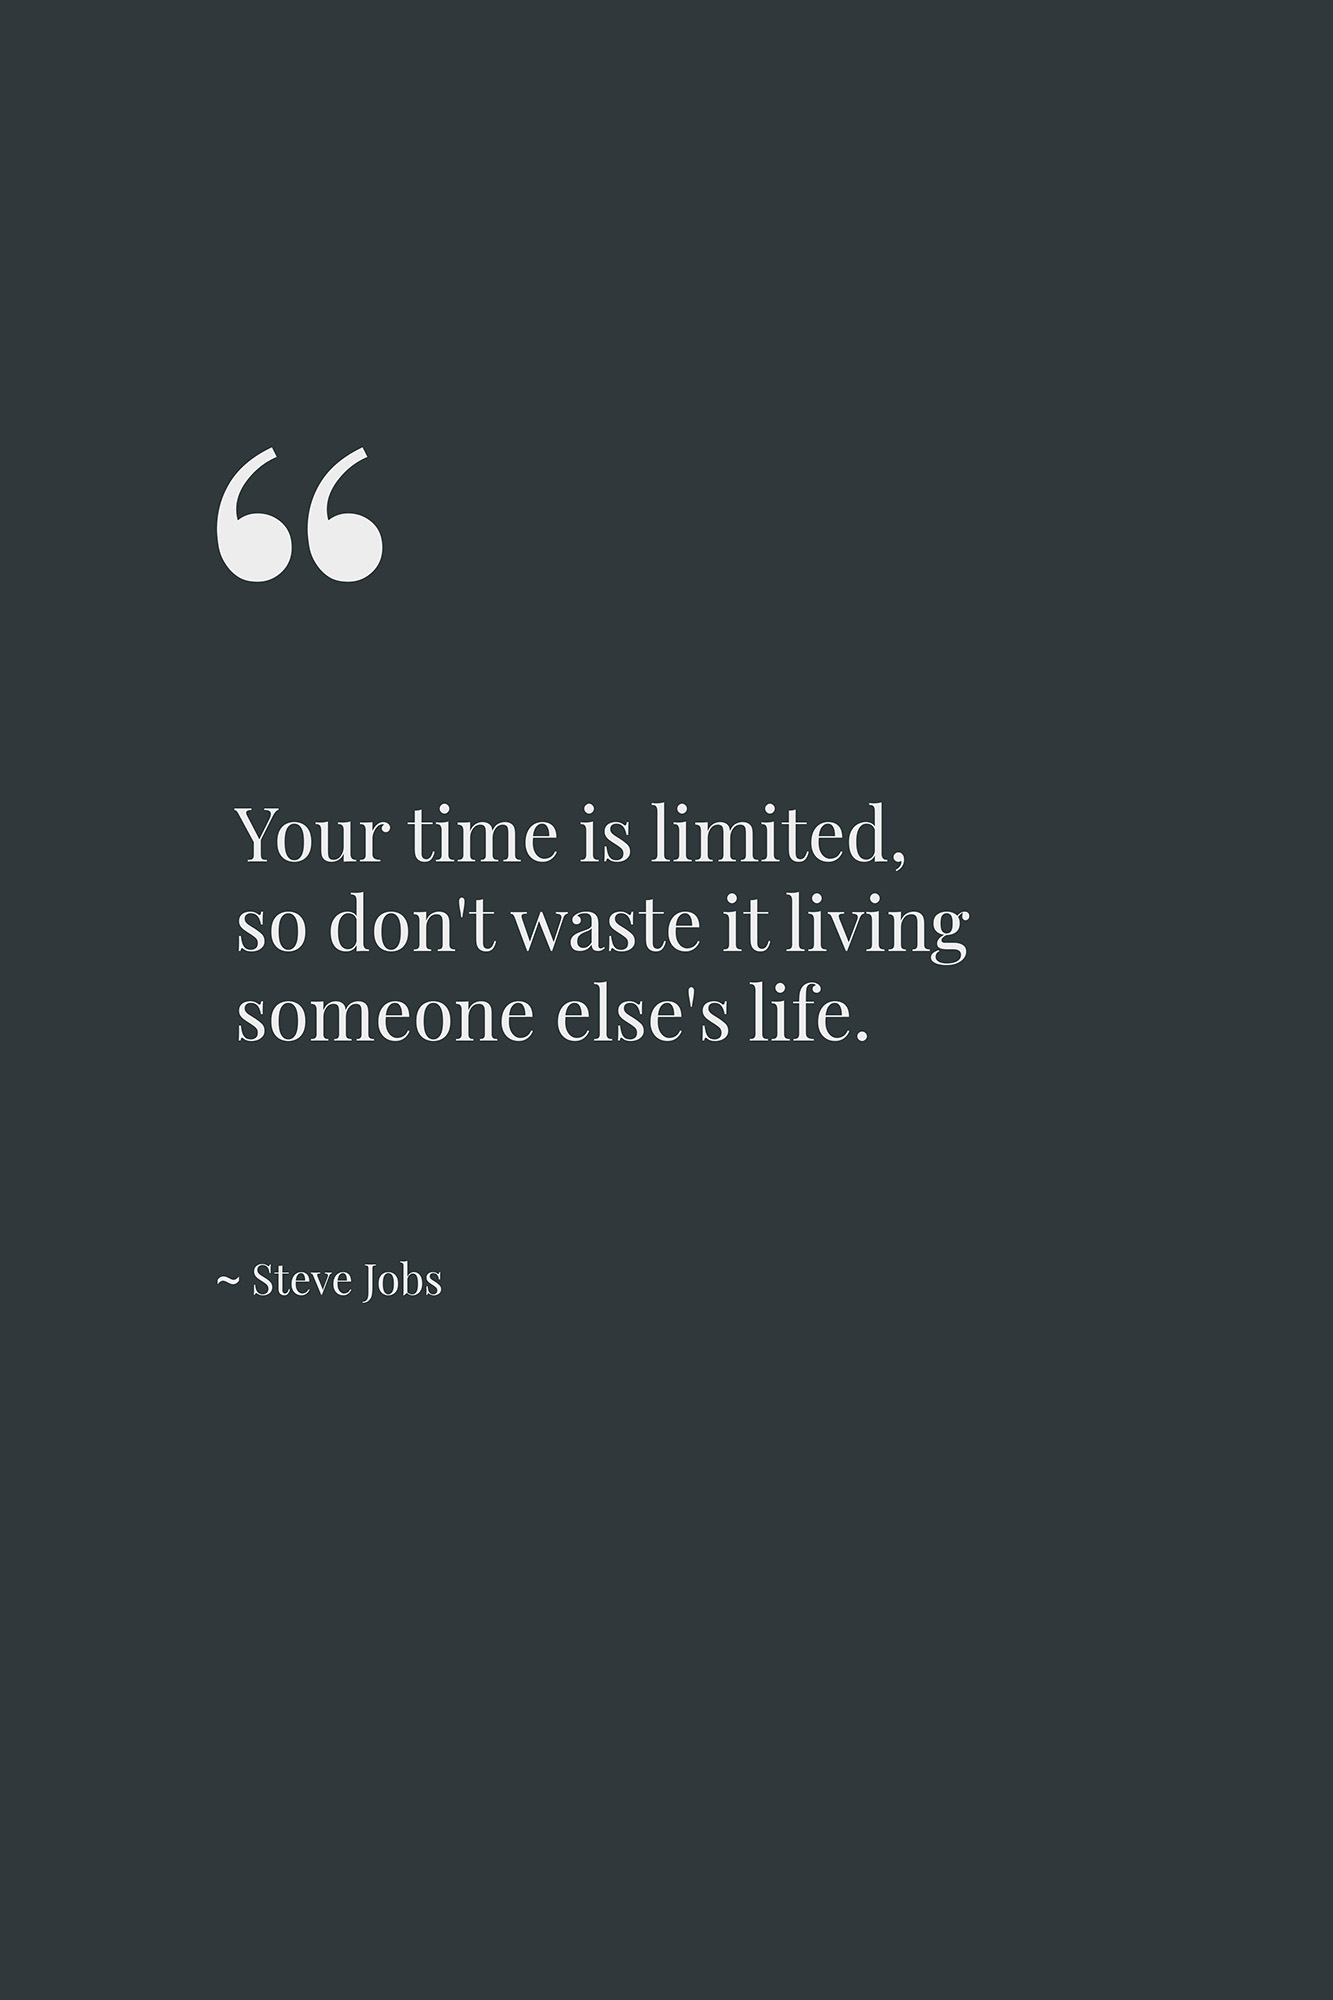 Your time is limited, so don't waste it living someone else's life. ~ Steve Jobs